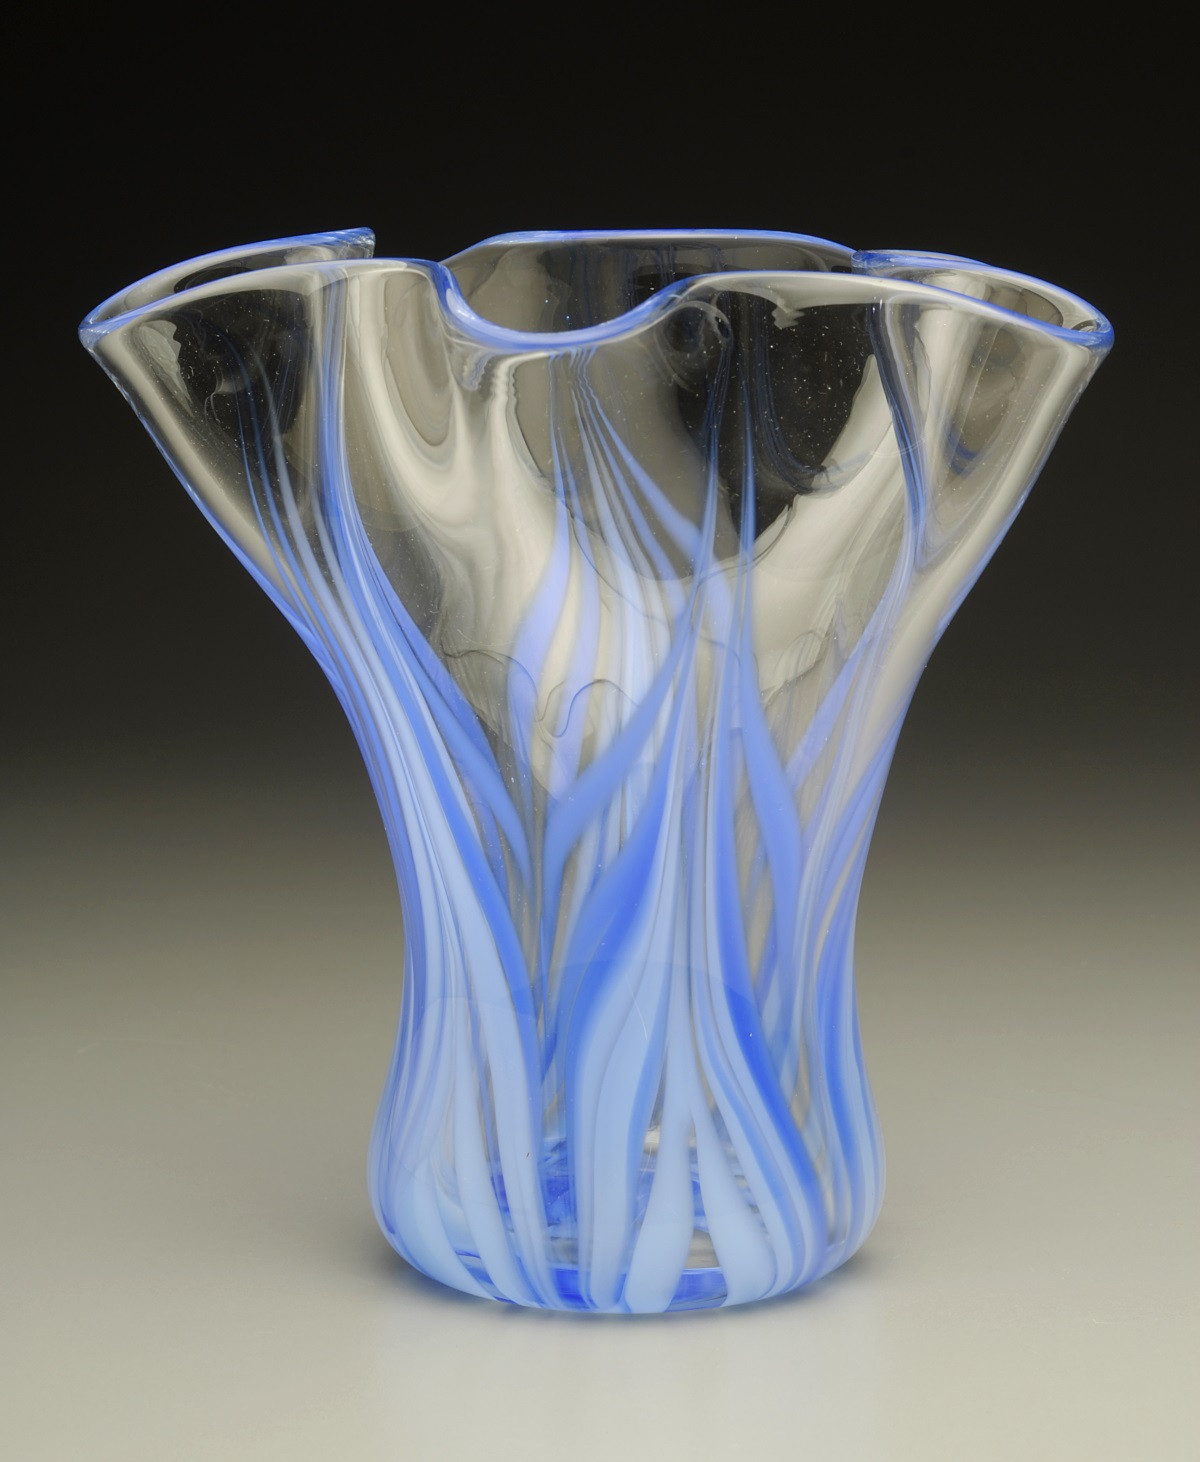 21 Lovely 5x5 Glass Cylinder Vase 2024 free download 5x5 glass cylinder vase of cac submissions creative arts workshop with flared vase glass 7e280b3 x 7e280b3